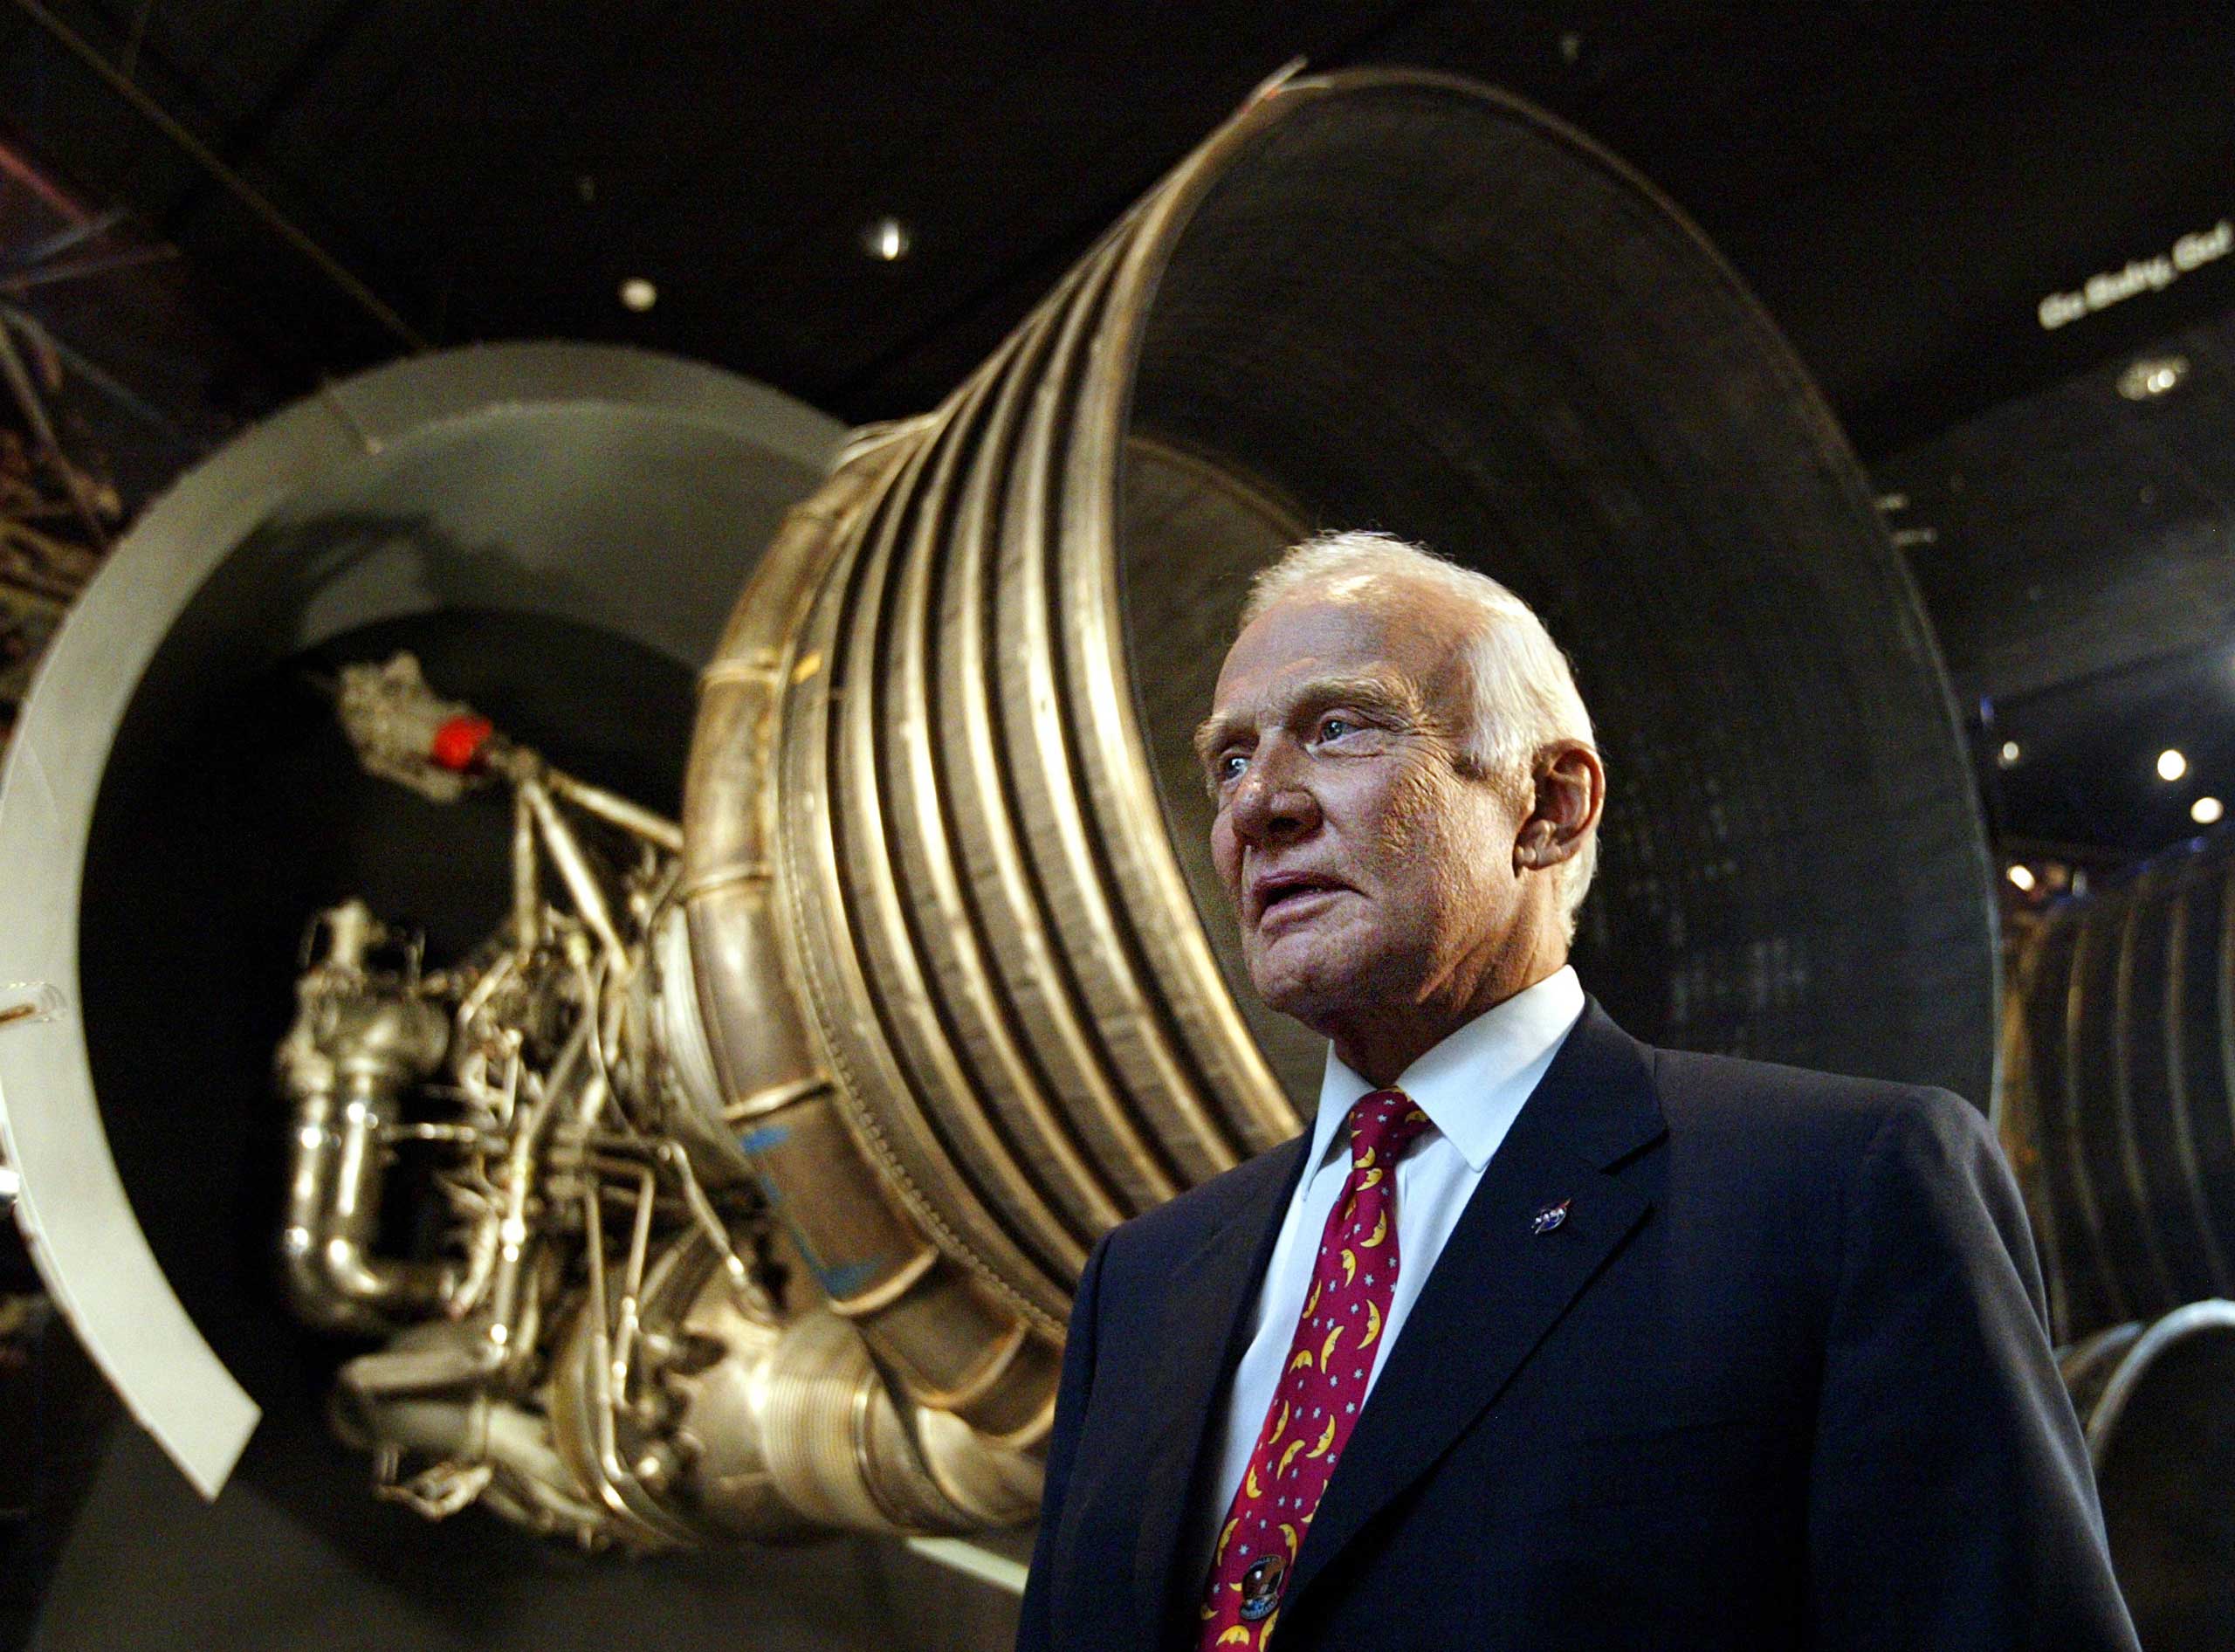 Aldrin has authored and co-authored numerous books, including his latest, titled 'Mission to Mars,' which was published in May of 2013.